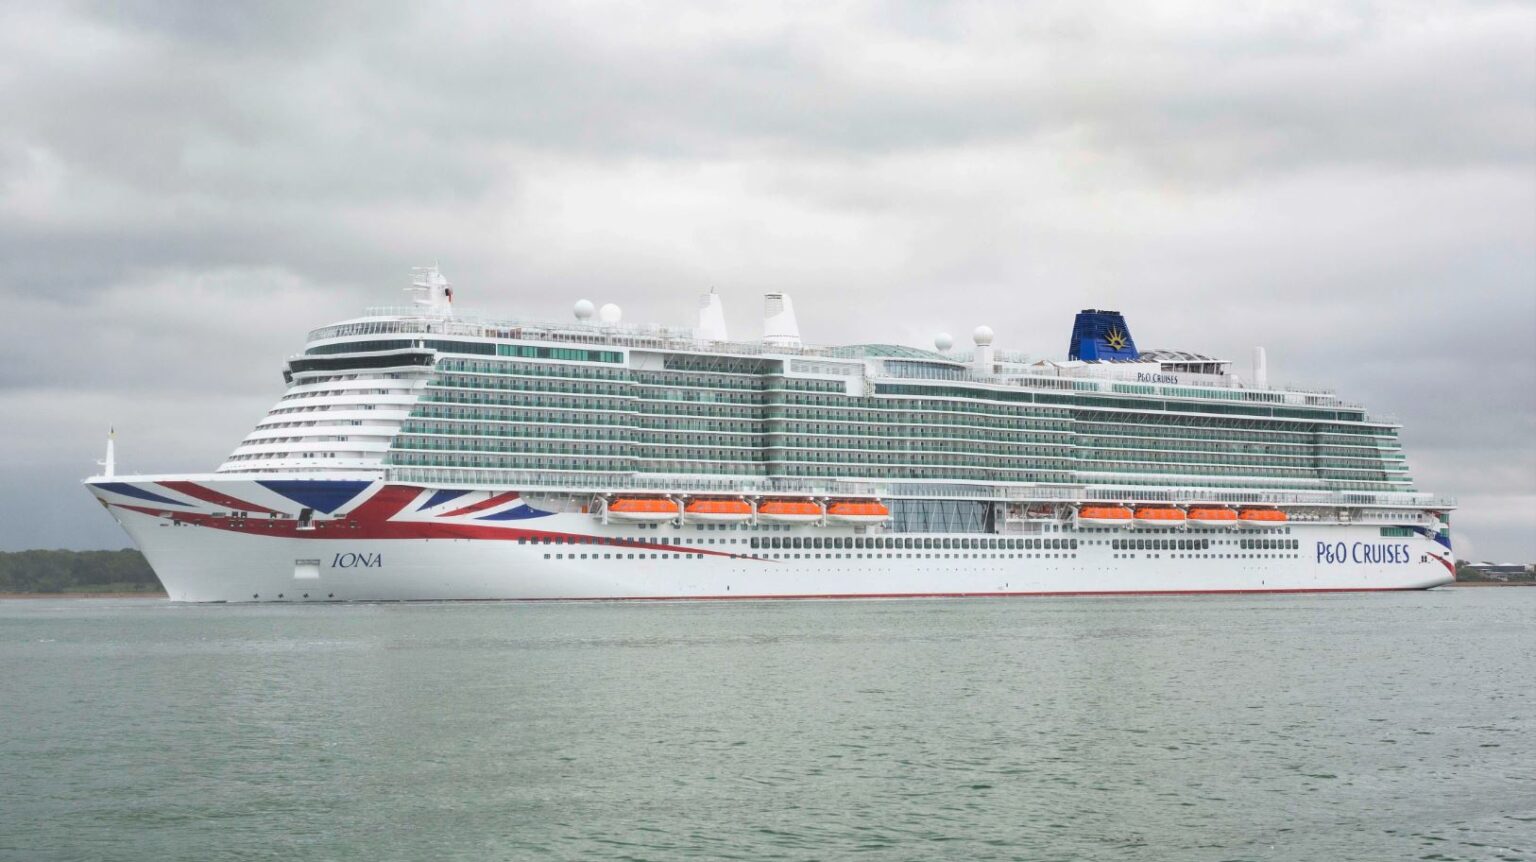 P&O Cruises Iona named in recordbreaking virtual ceremony CRUISE TO